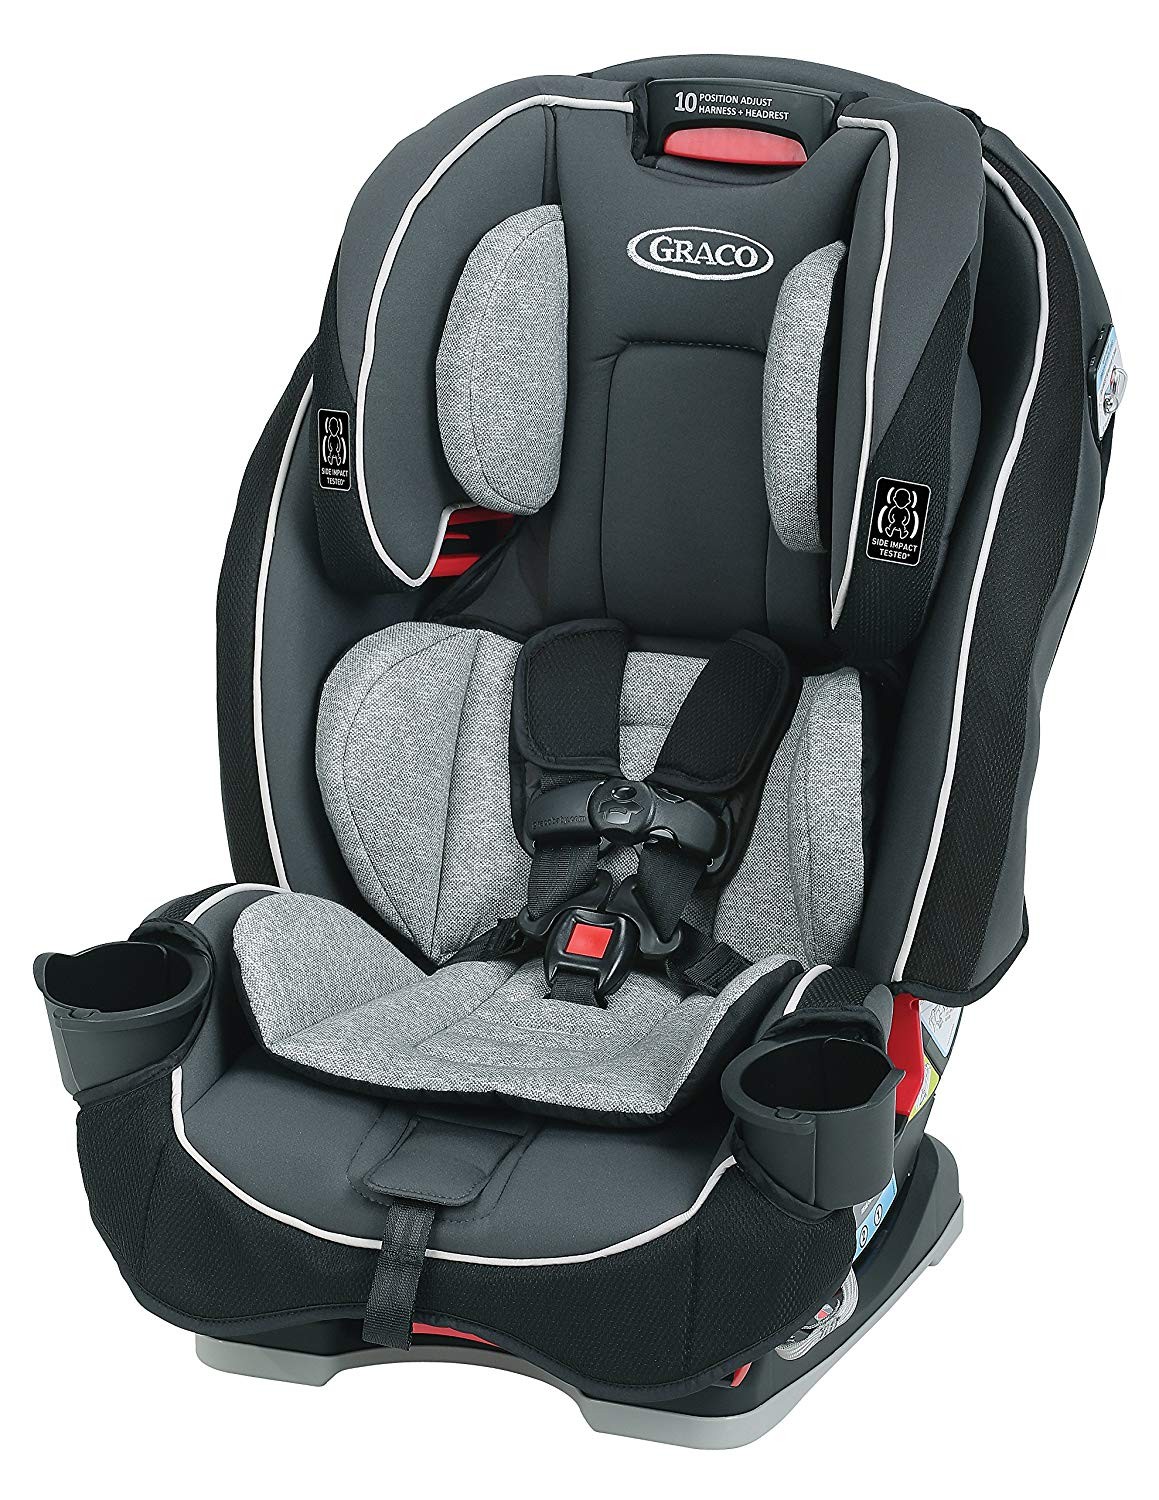 Graco SlimFit 3 in 1 Convertible Car Seat | Infant to Toddler Car Seat, Saves Space in your Back Sea